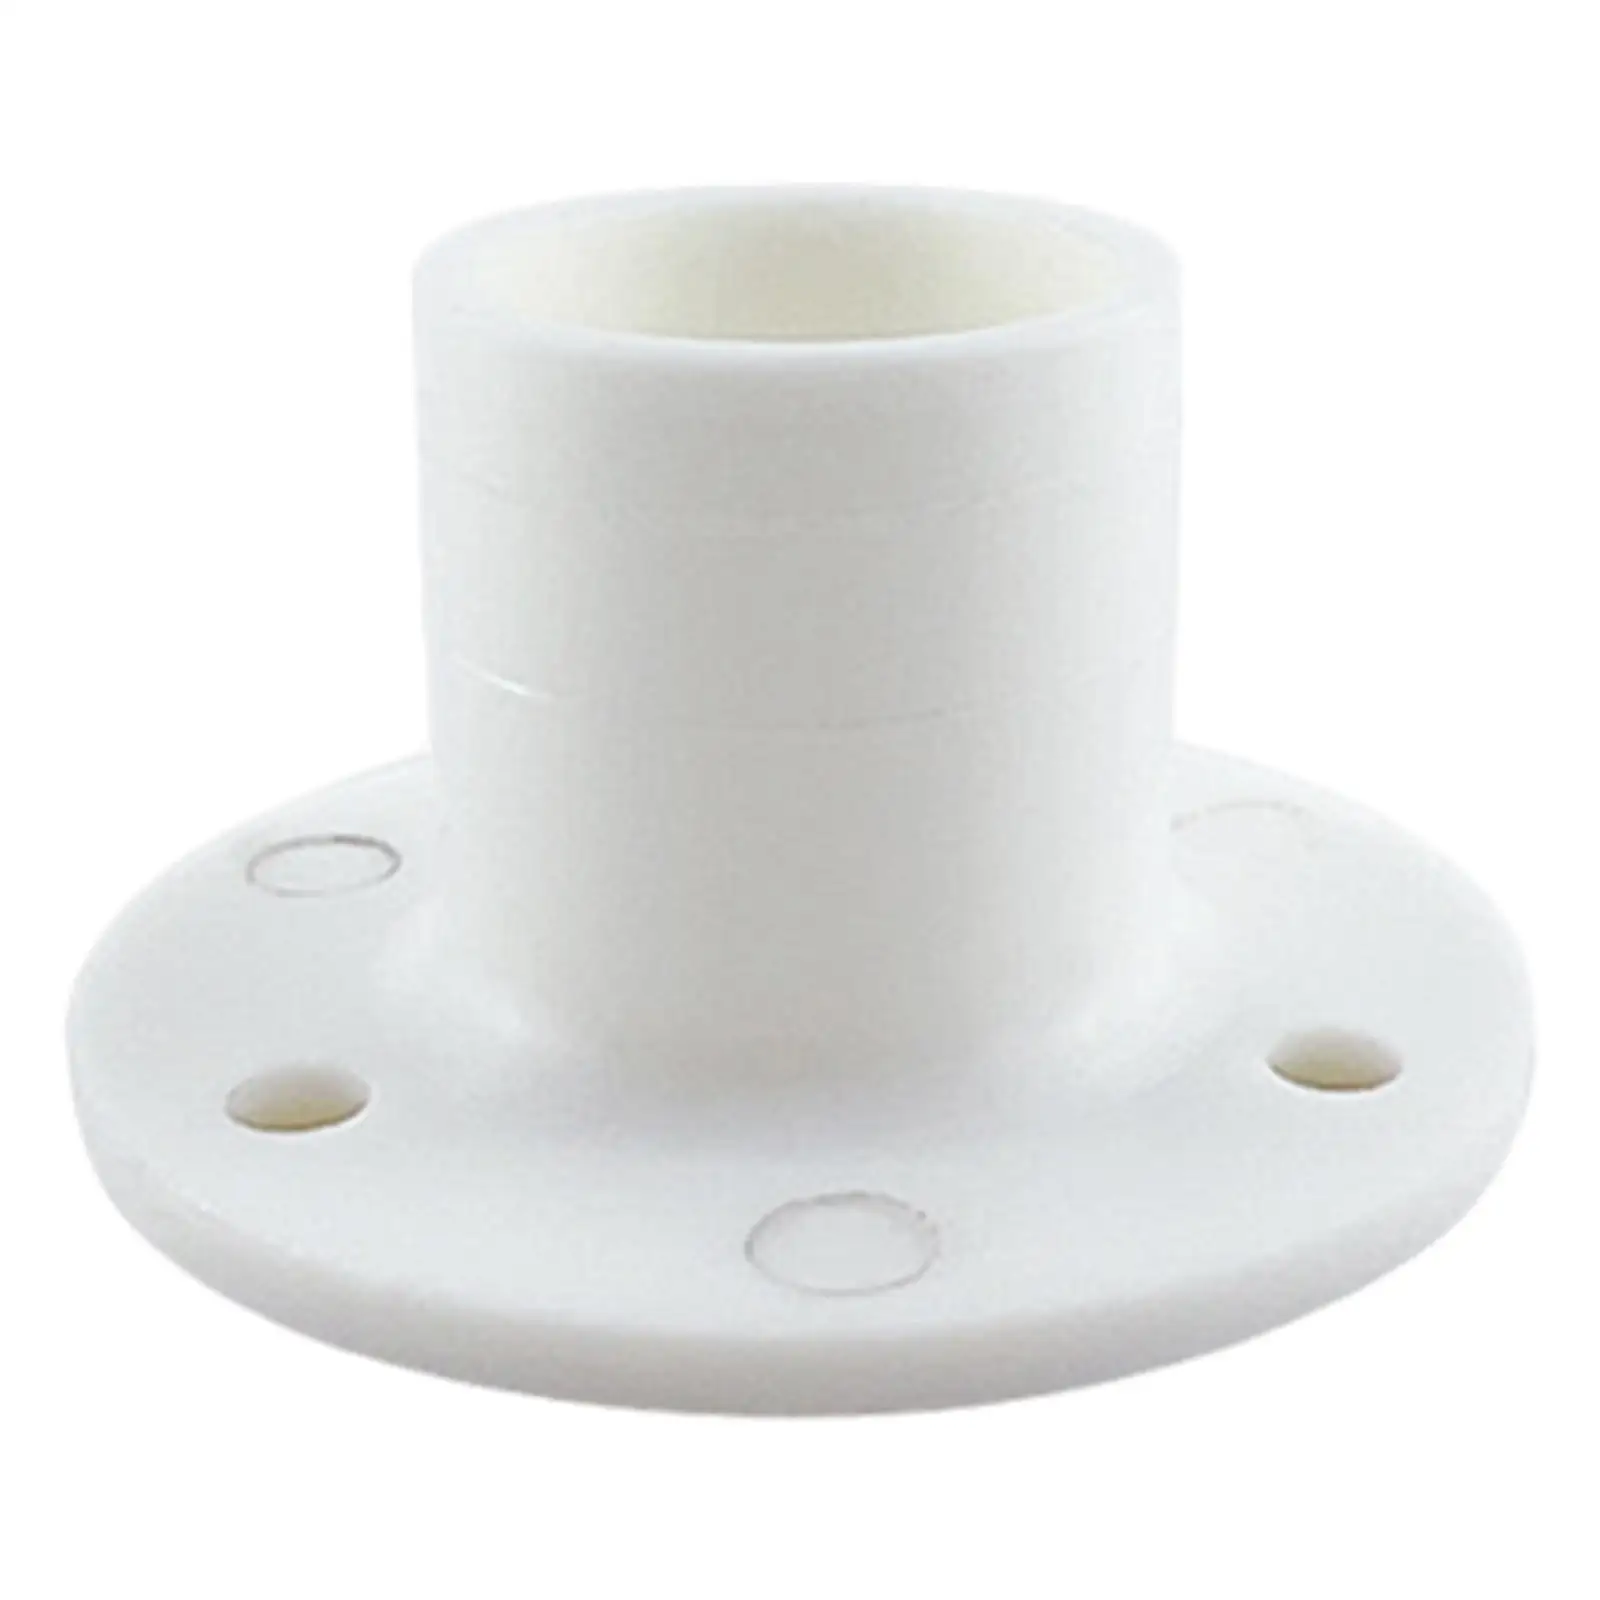 

Compact Boat Floor Deck Drain Nylon Deck Drainage Scupper for Boat Yacht Marine with Screws Easy to Install Water Drain